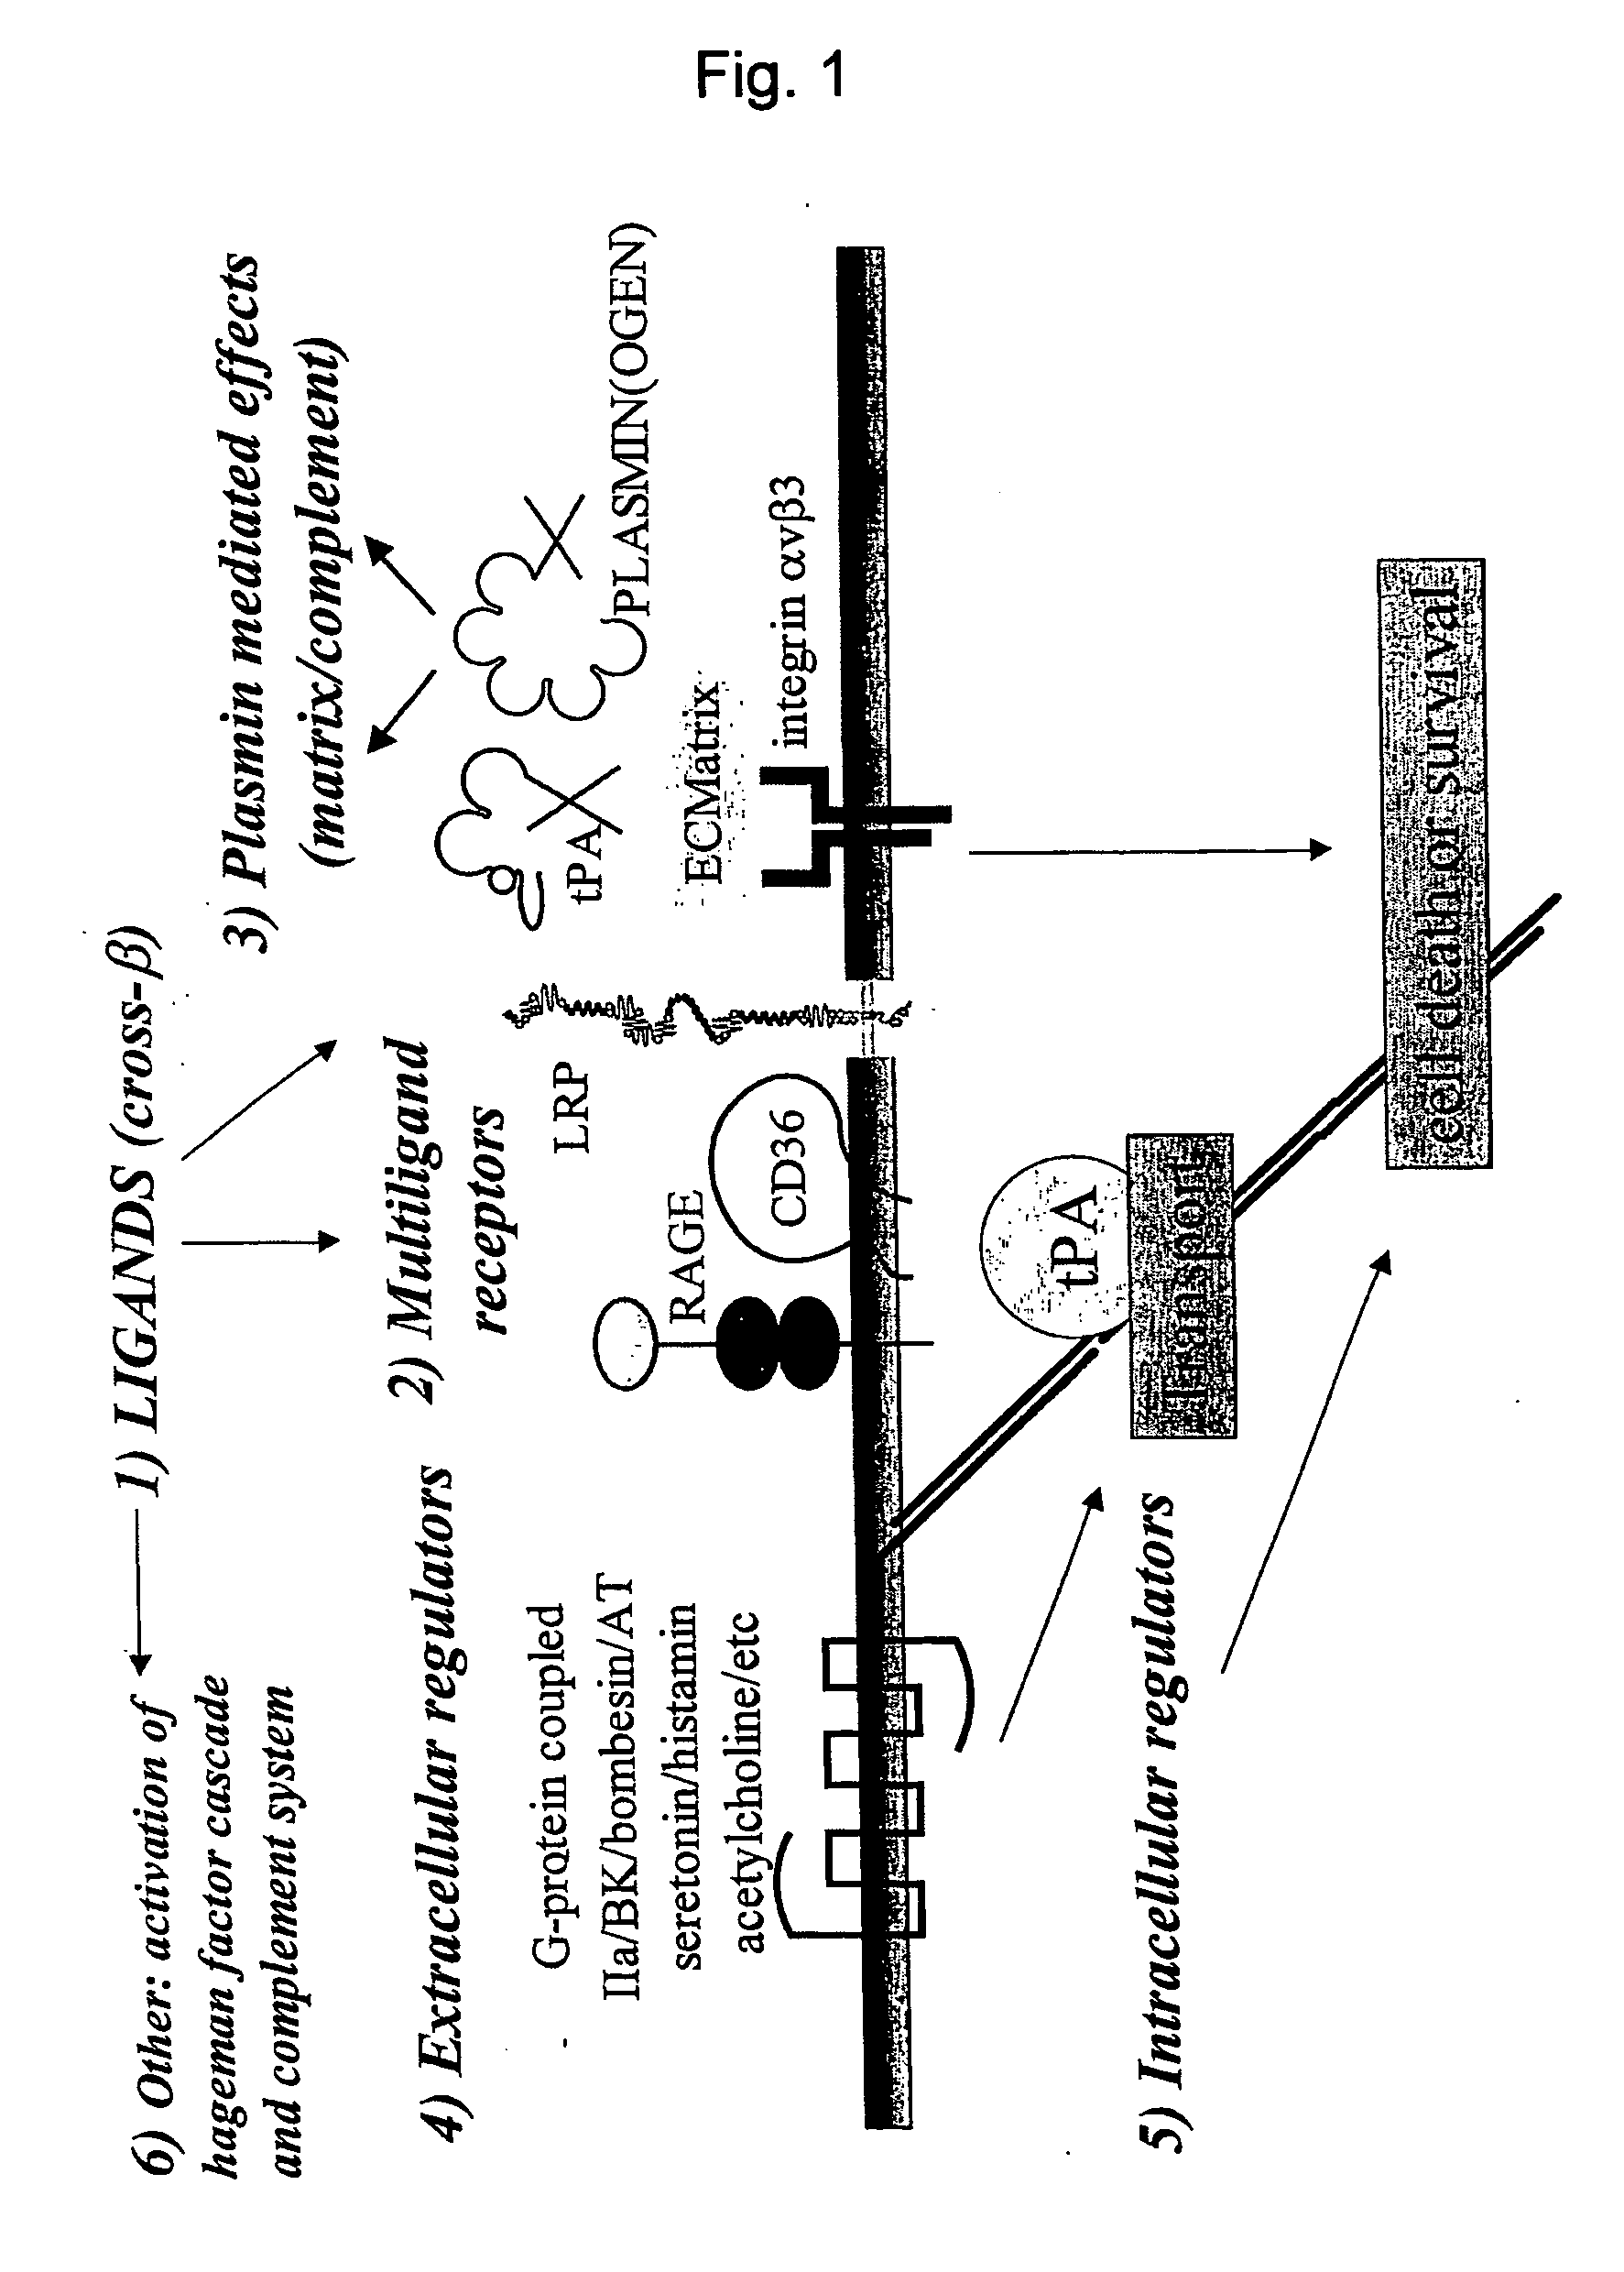 Cross-beta structure comprising amyloid binding proteins and methods for detection of the cross-beta structure, for modulating cross-beta structures fibril formation and for modulating cross-beta structure-mediated toxicity and method for interfering with blood coagulation